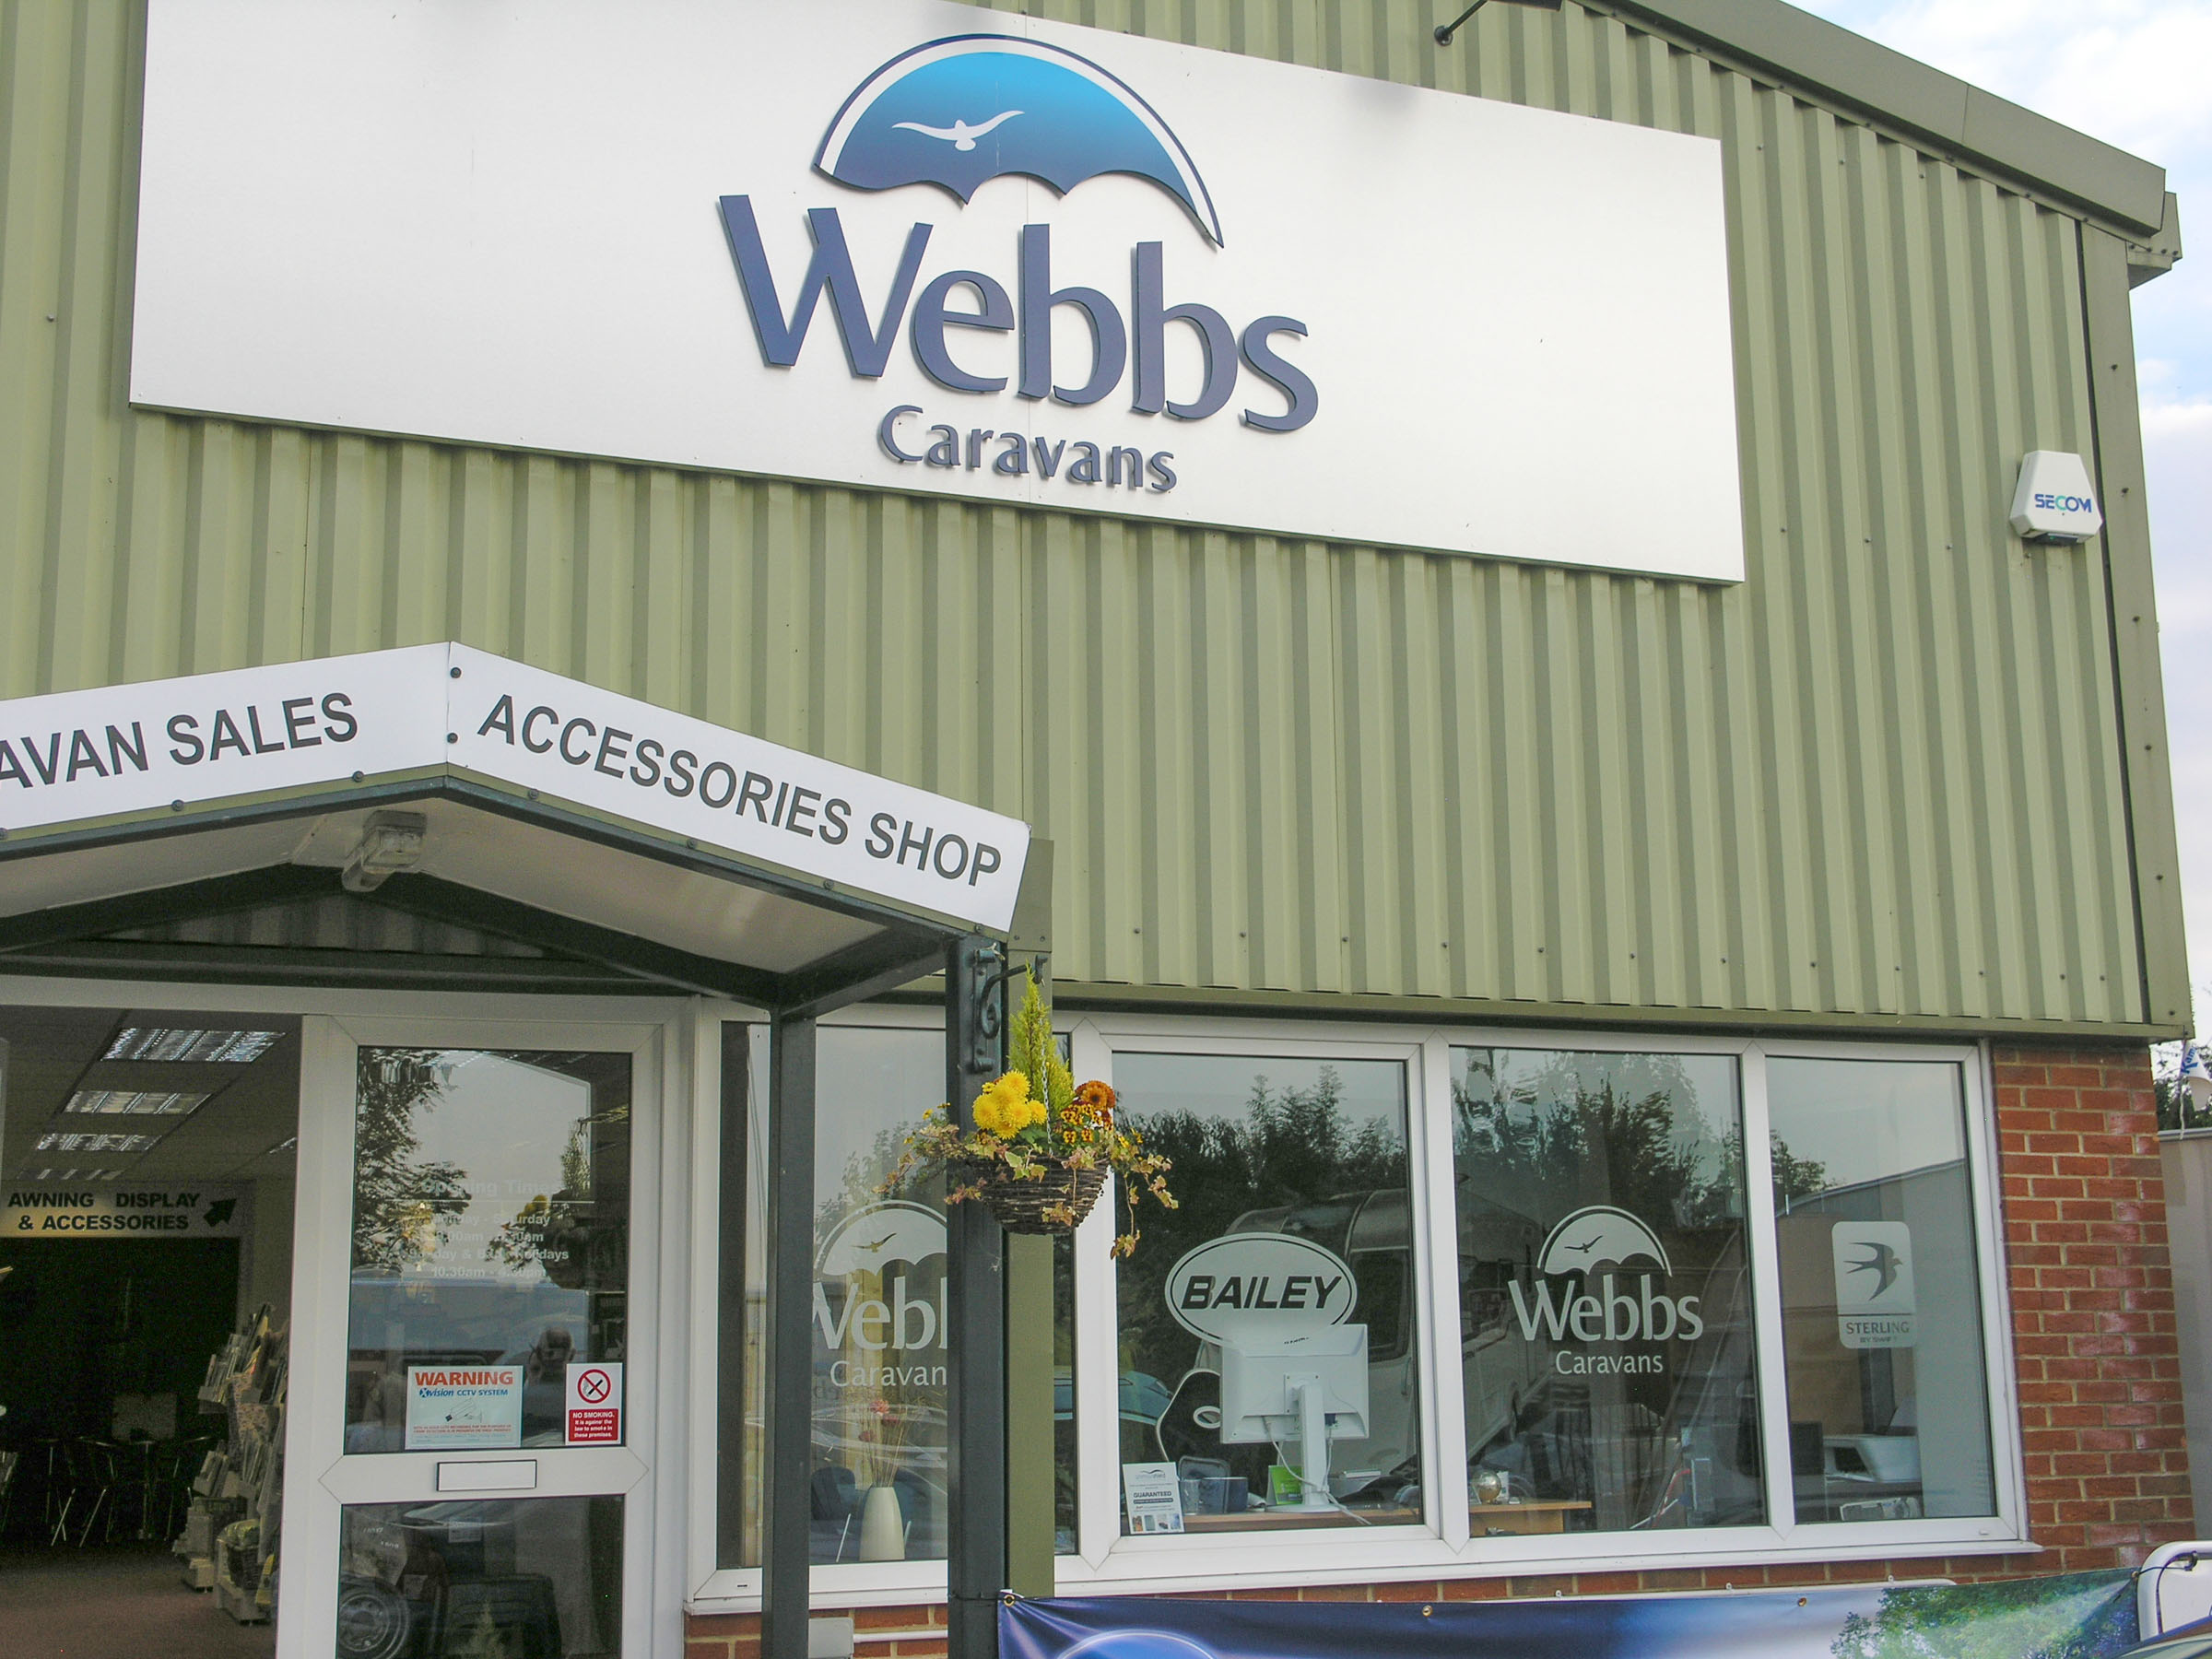 Webbs Caravans entrance, with the mural just visible throught he window